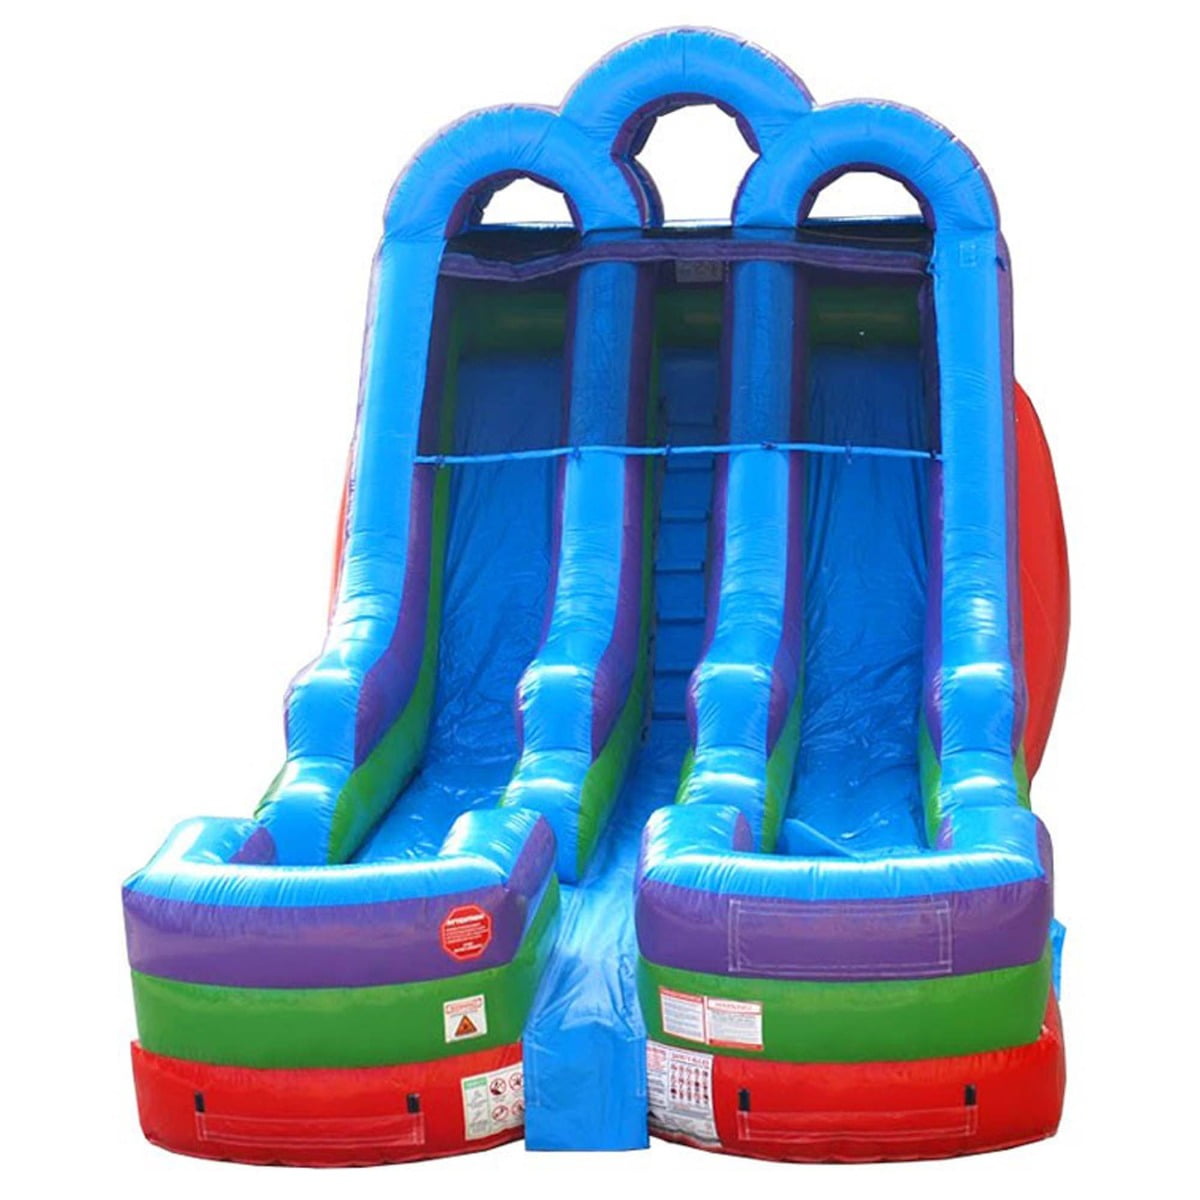 TentandTable 20-Foot Long PVC Plastic Water Misting Hose Inflatable Water Slide Bounce Houses 